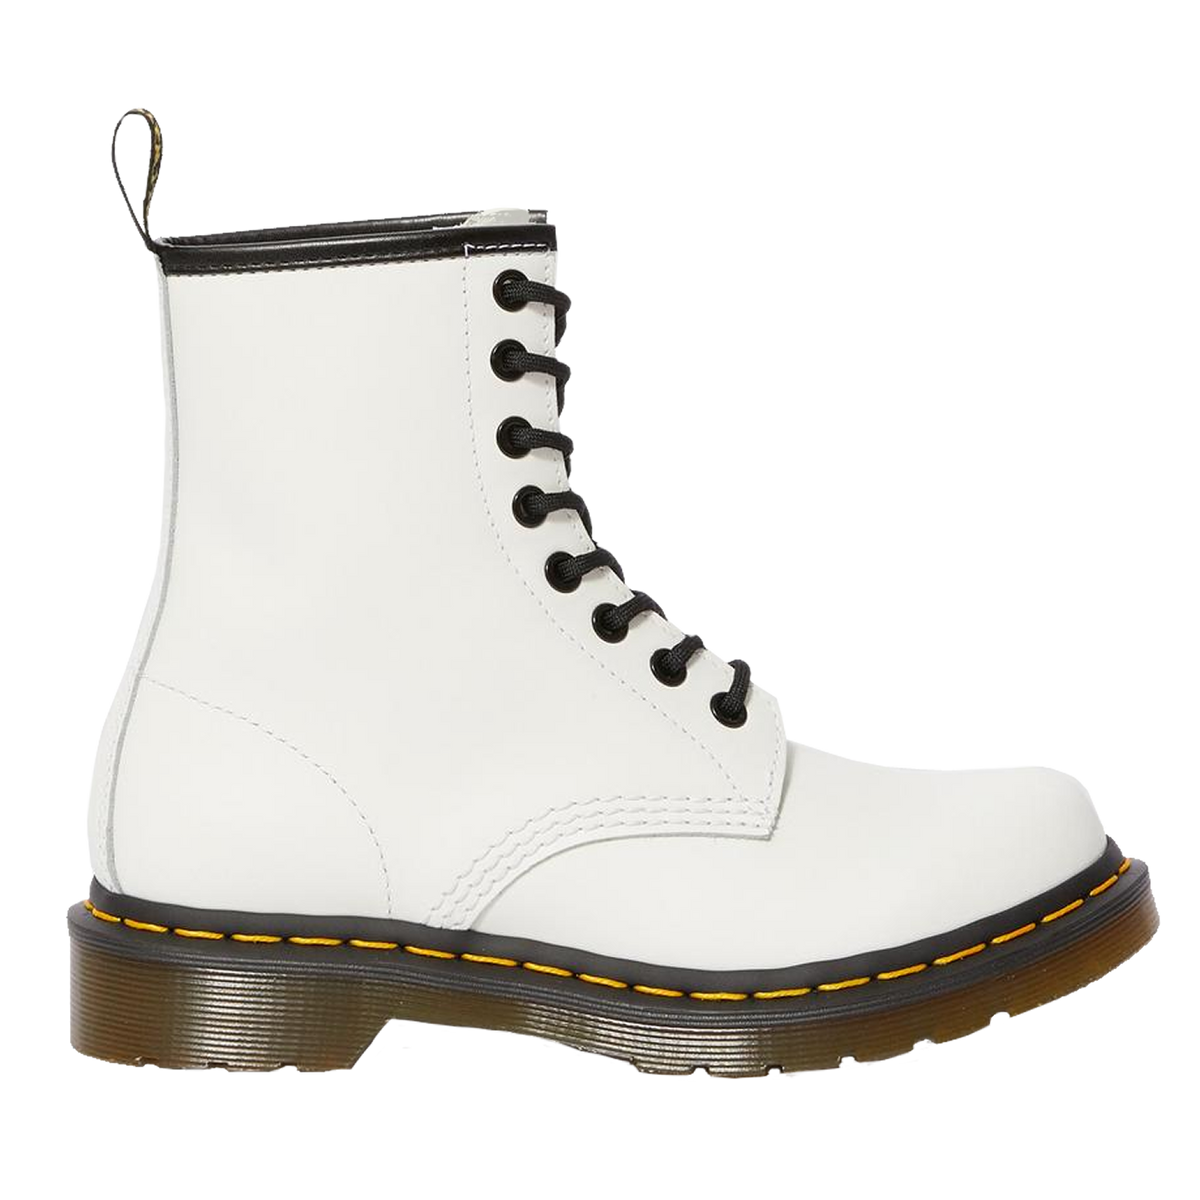 W 1460 SMOOTH LEATHER LACE UP BOOT - WHITE